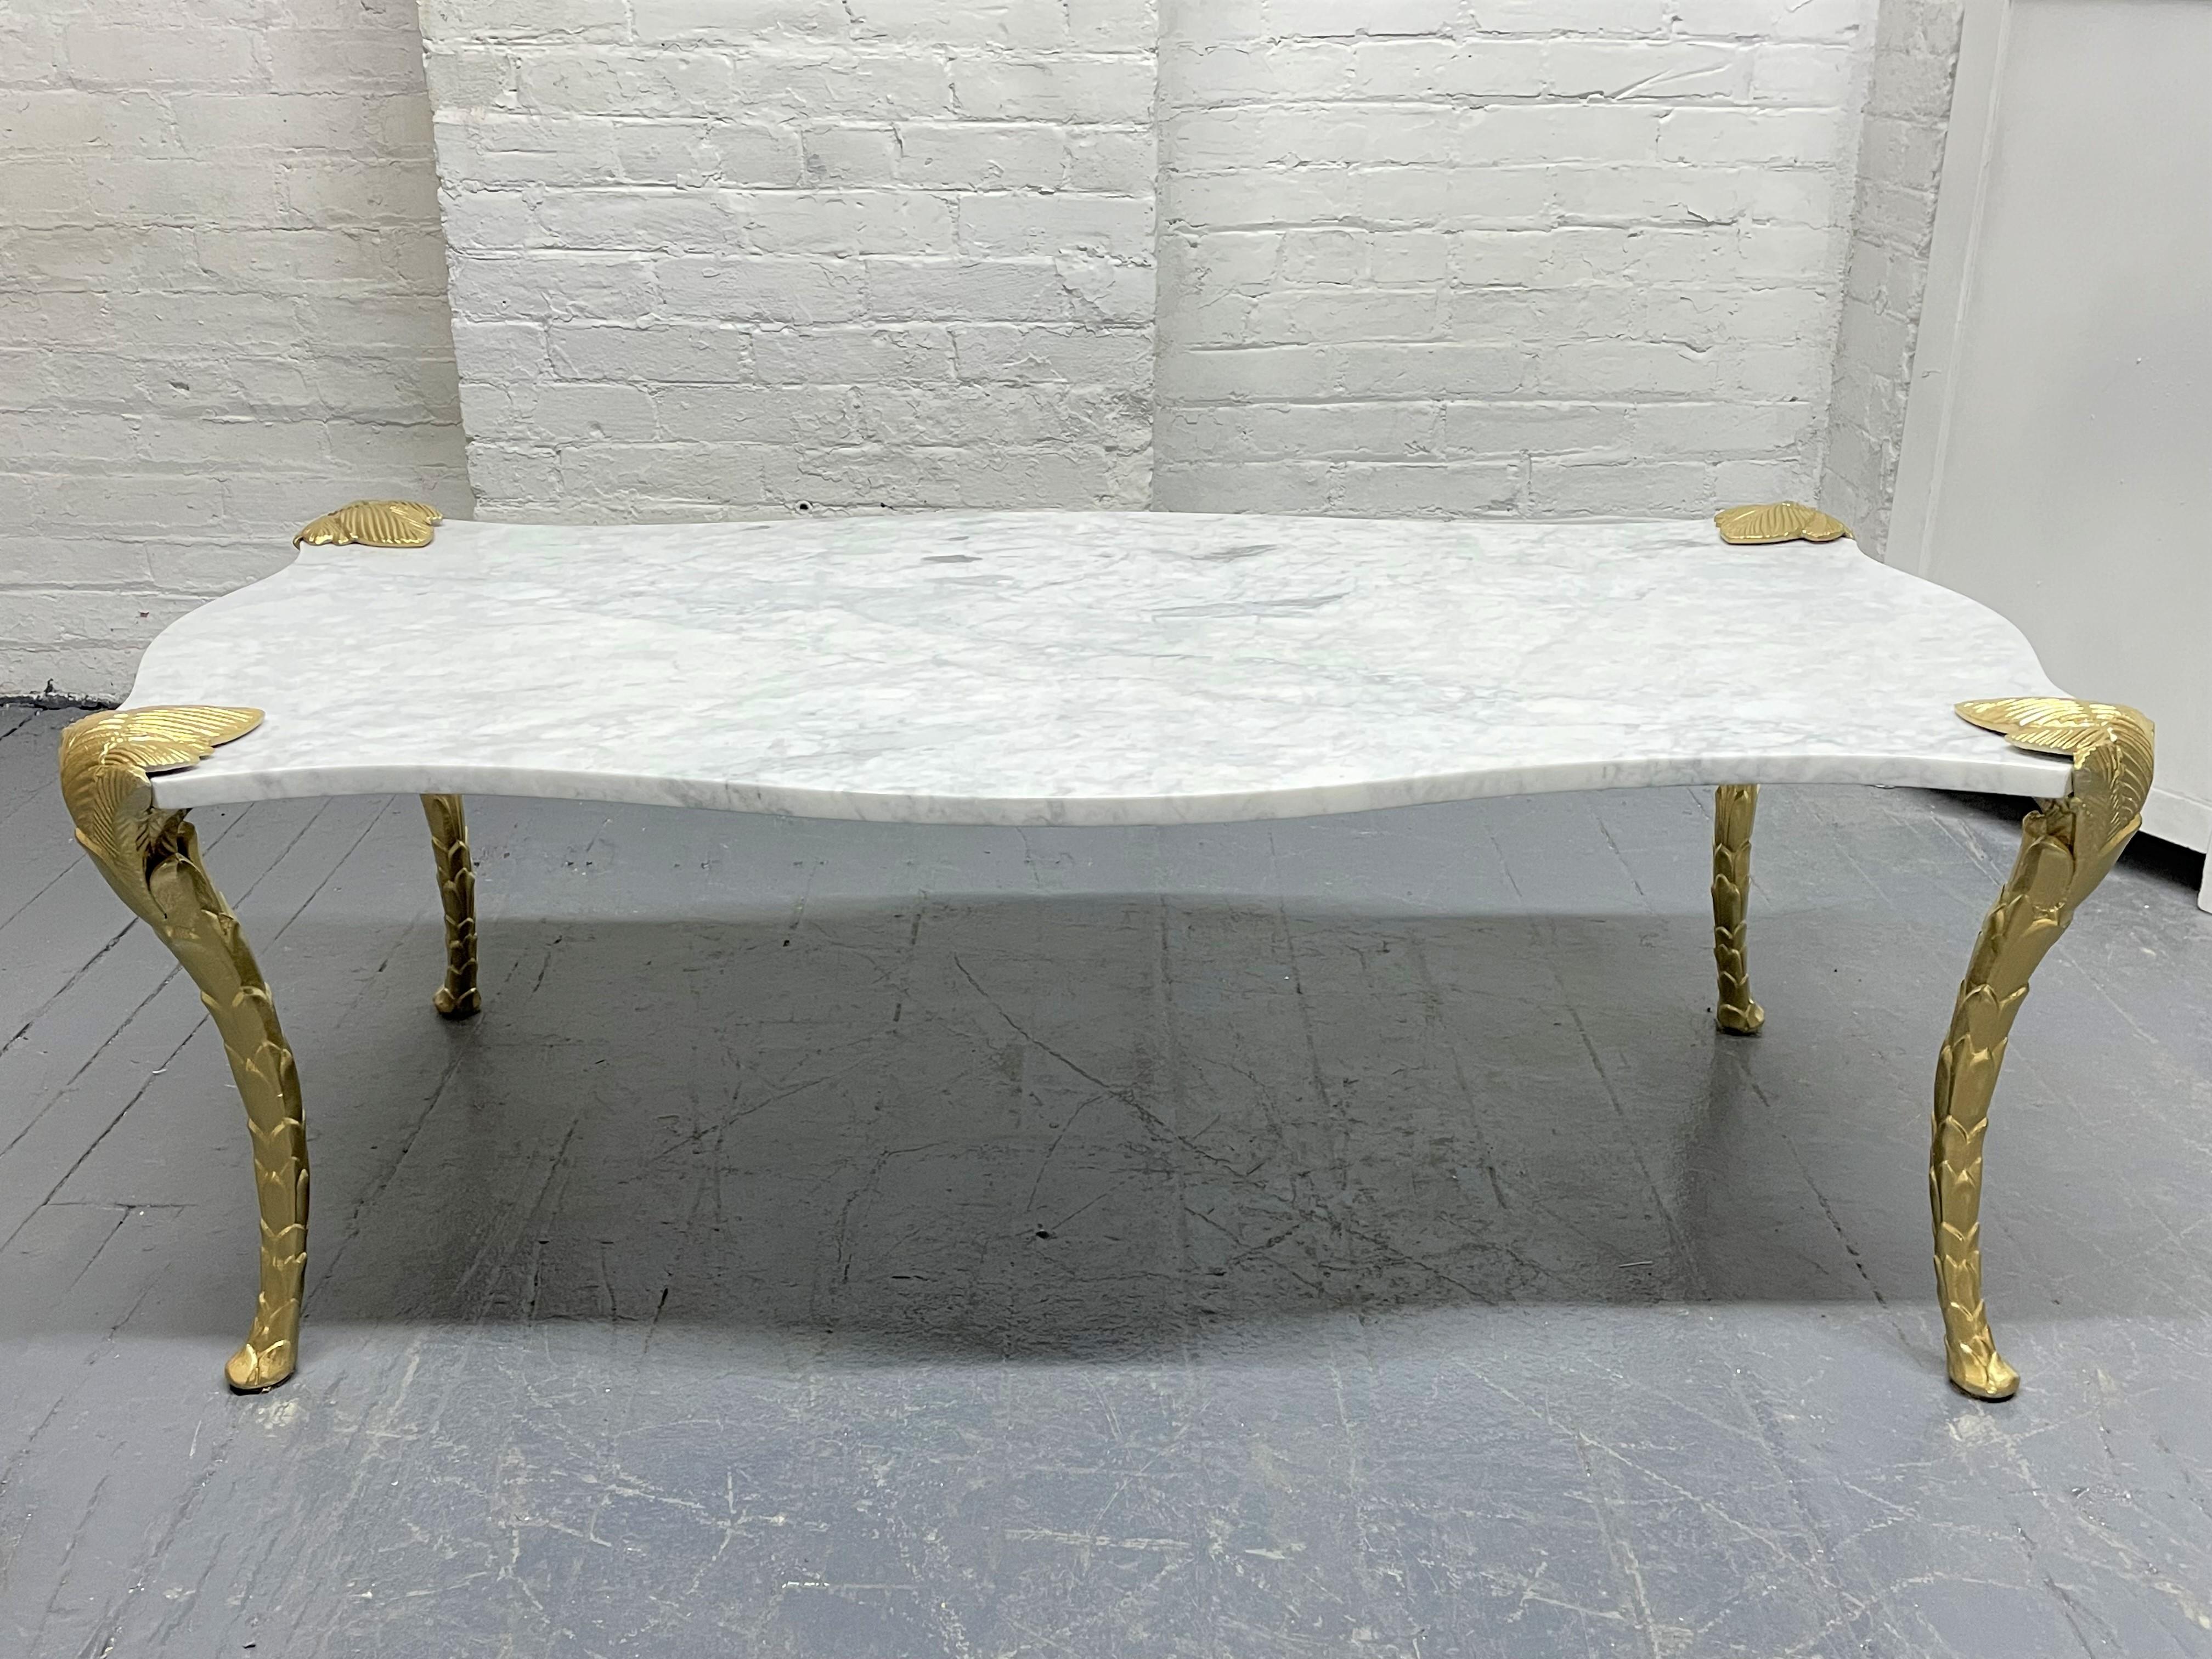 Directoire Decorative Carrara Marble Top Coffee Table with Floral Legs For Sale